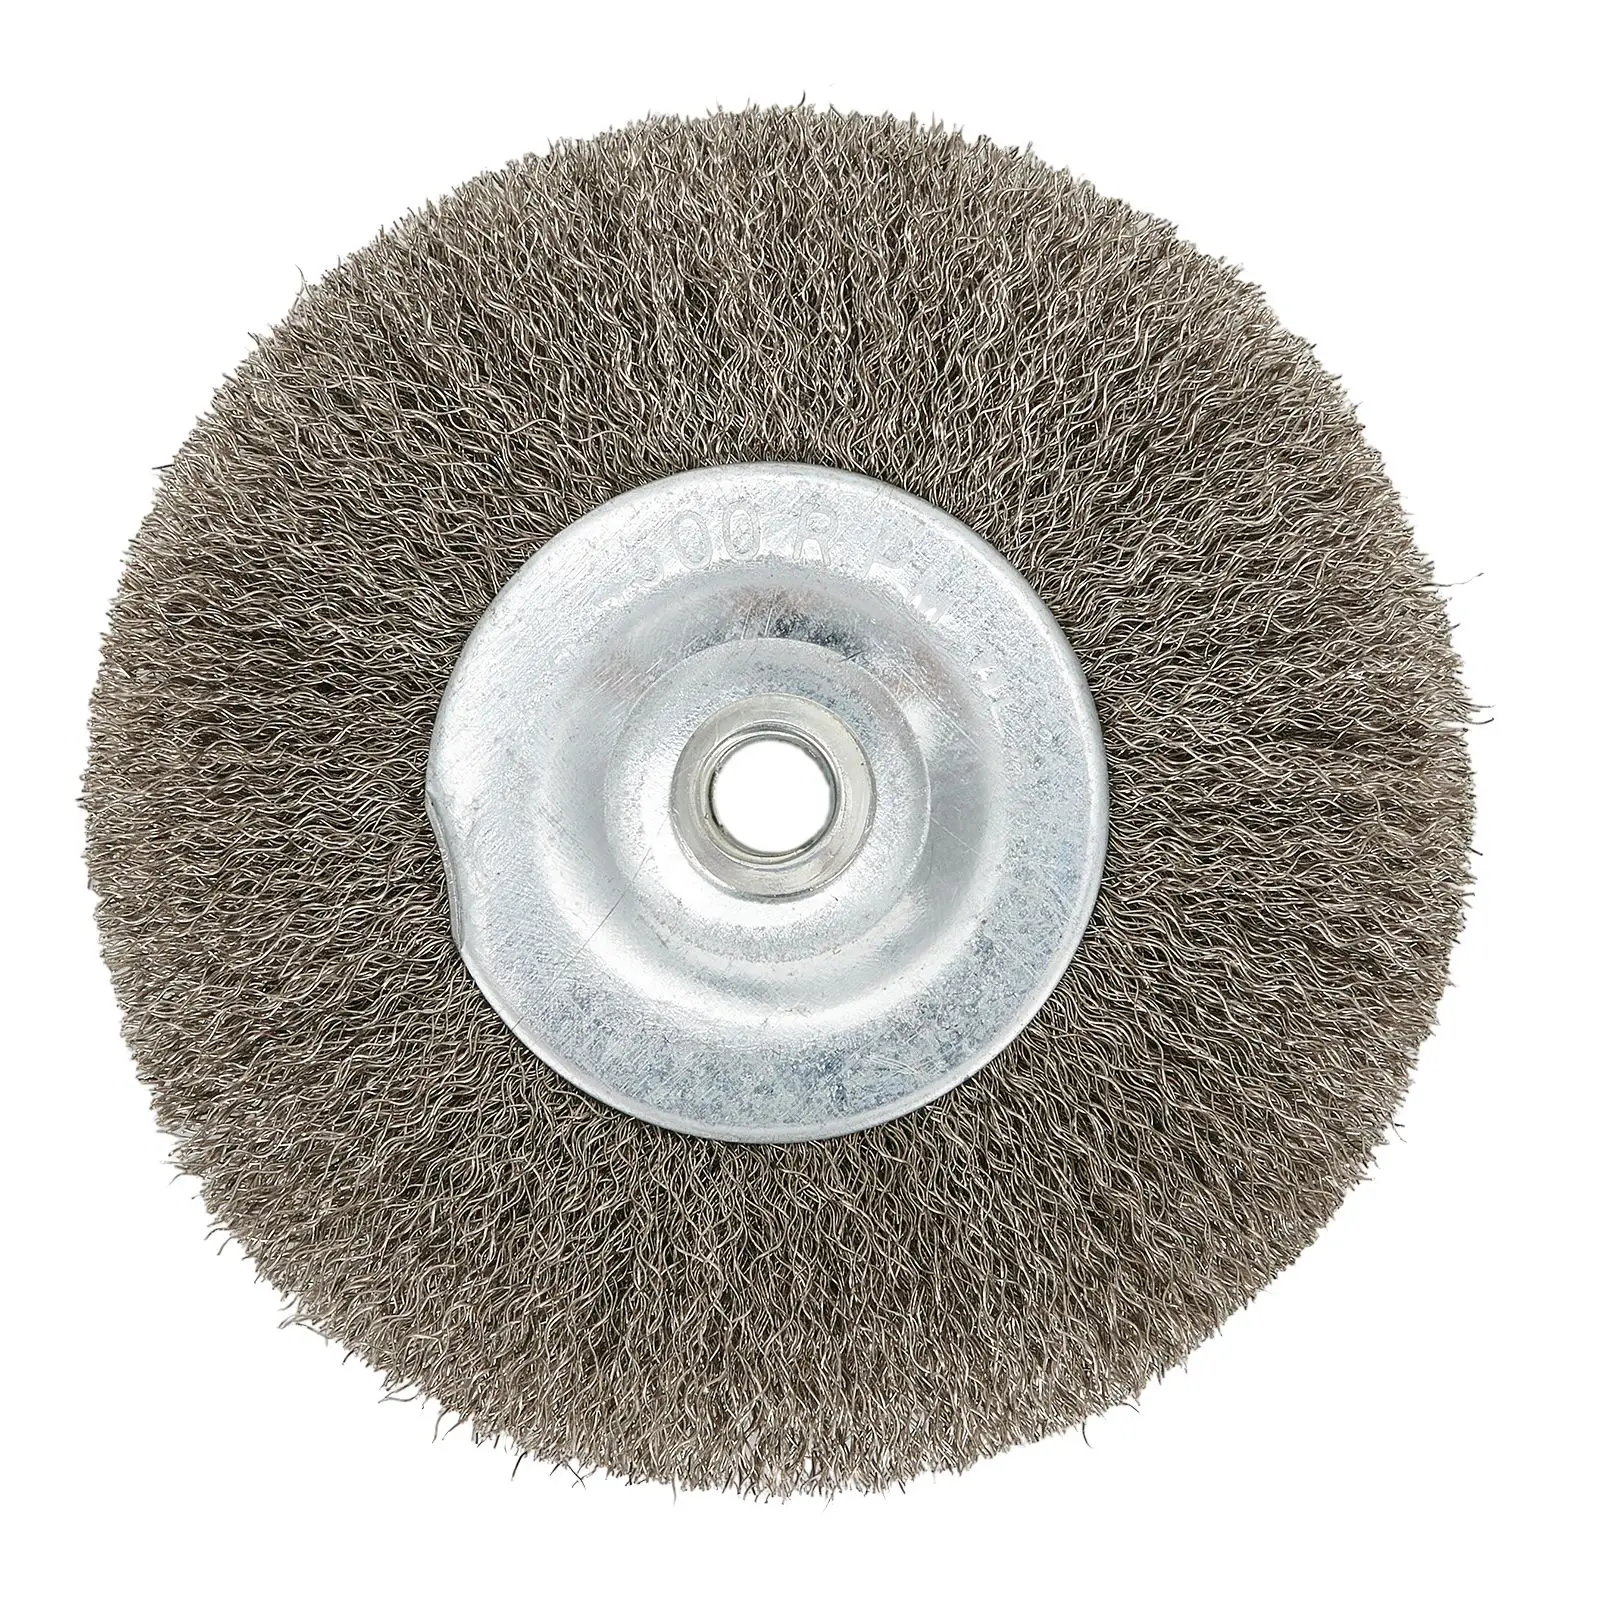 Get Your Surface Ready with 3In Flat Crimped Wire Wheel Brush Made from Stainless Steel Perfect for Angle Grinder